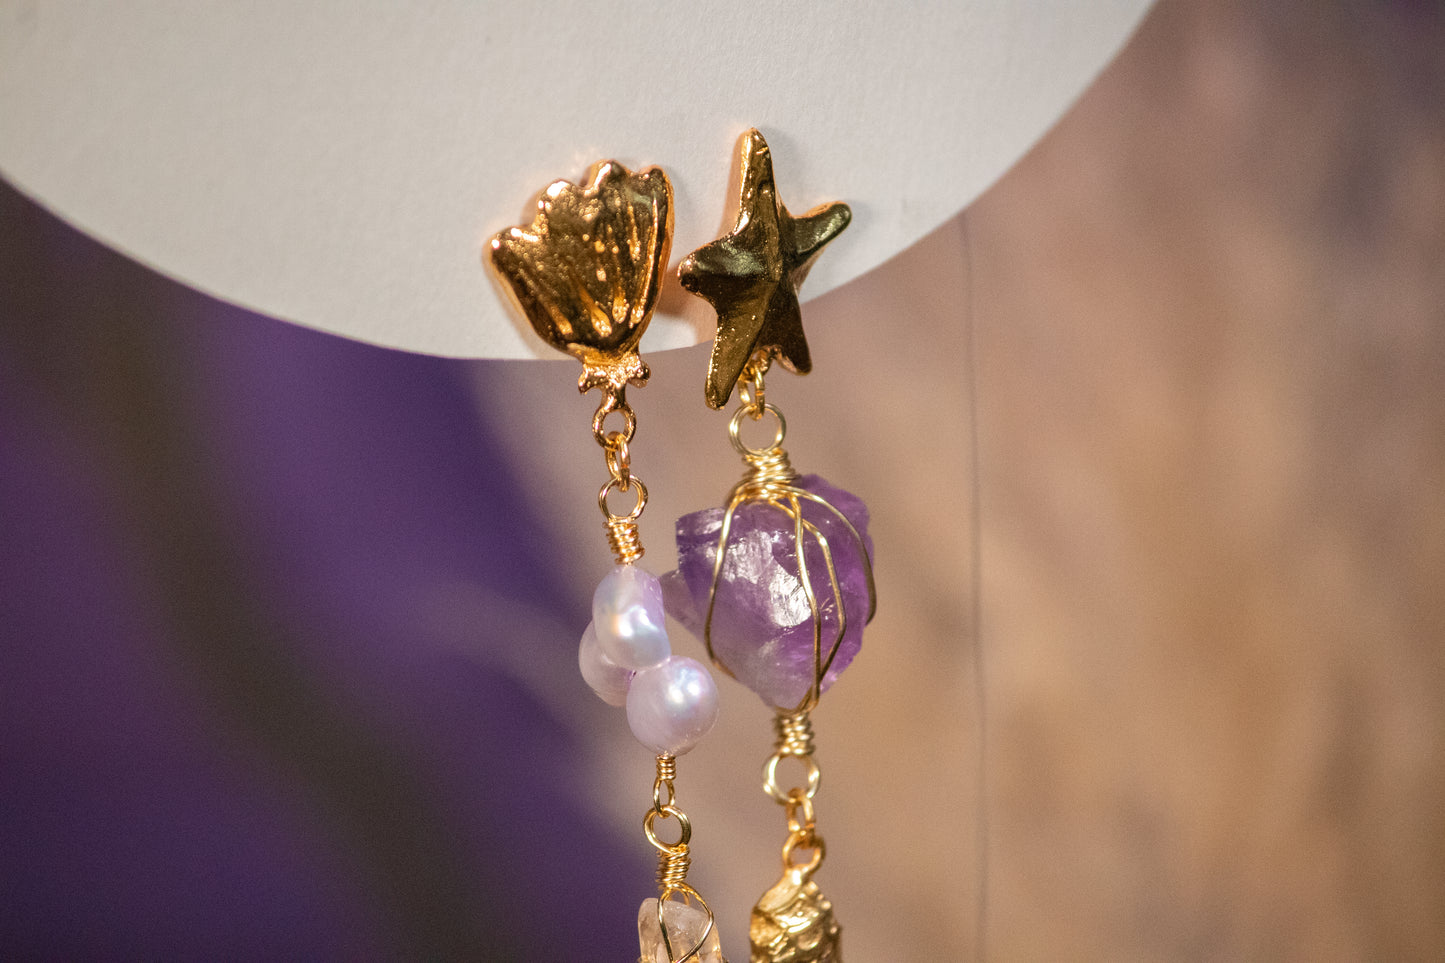 Itza. Earrings with amethyst, white quartz and pearls